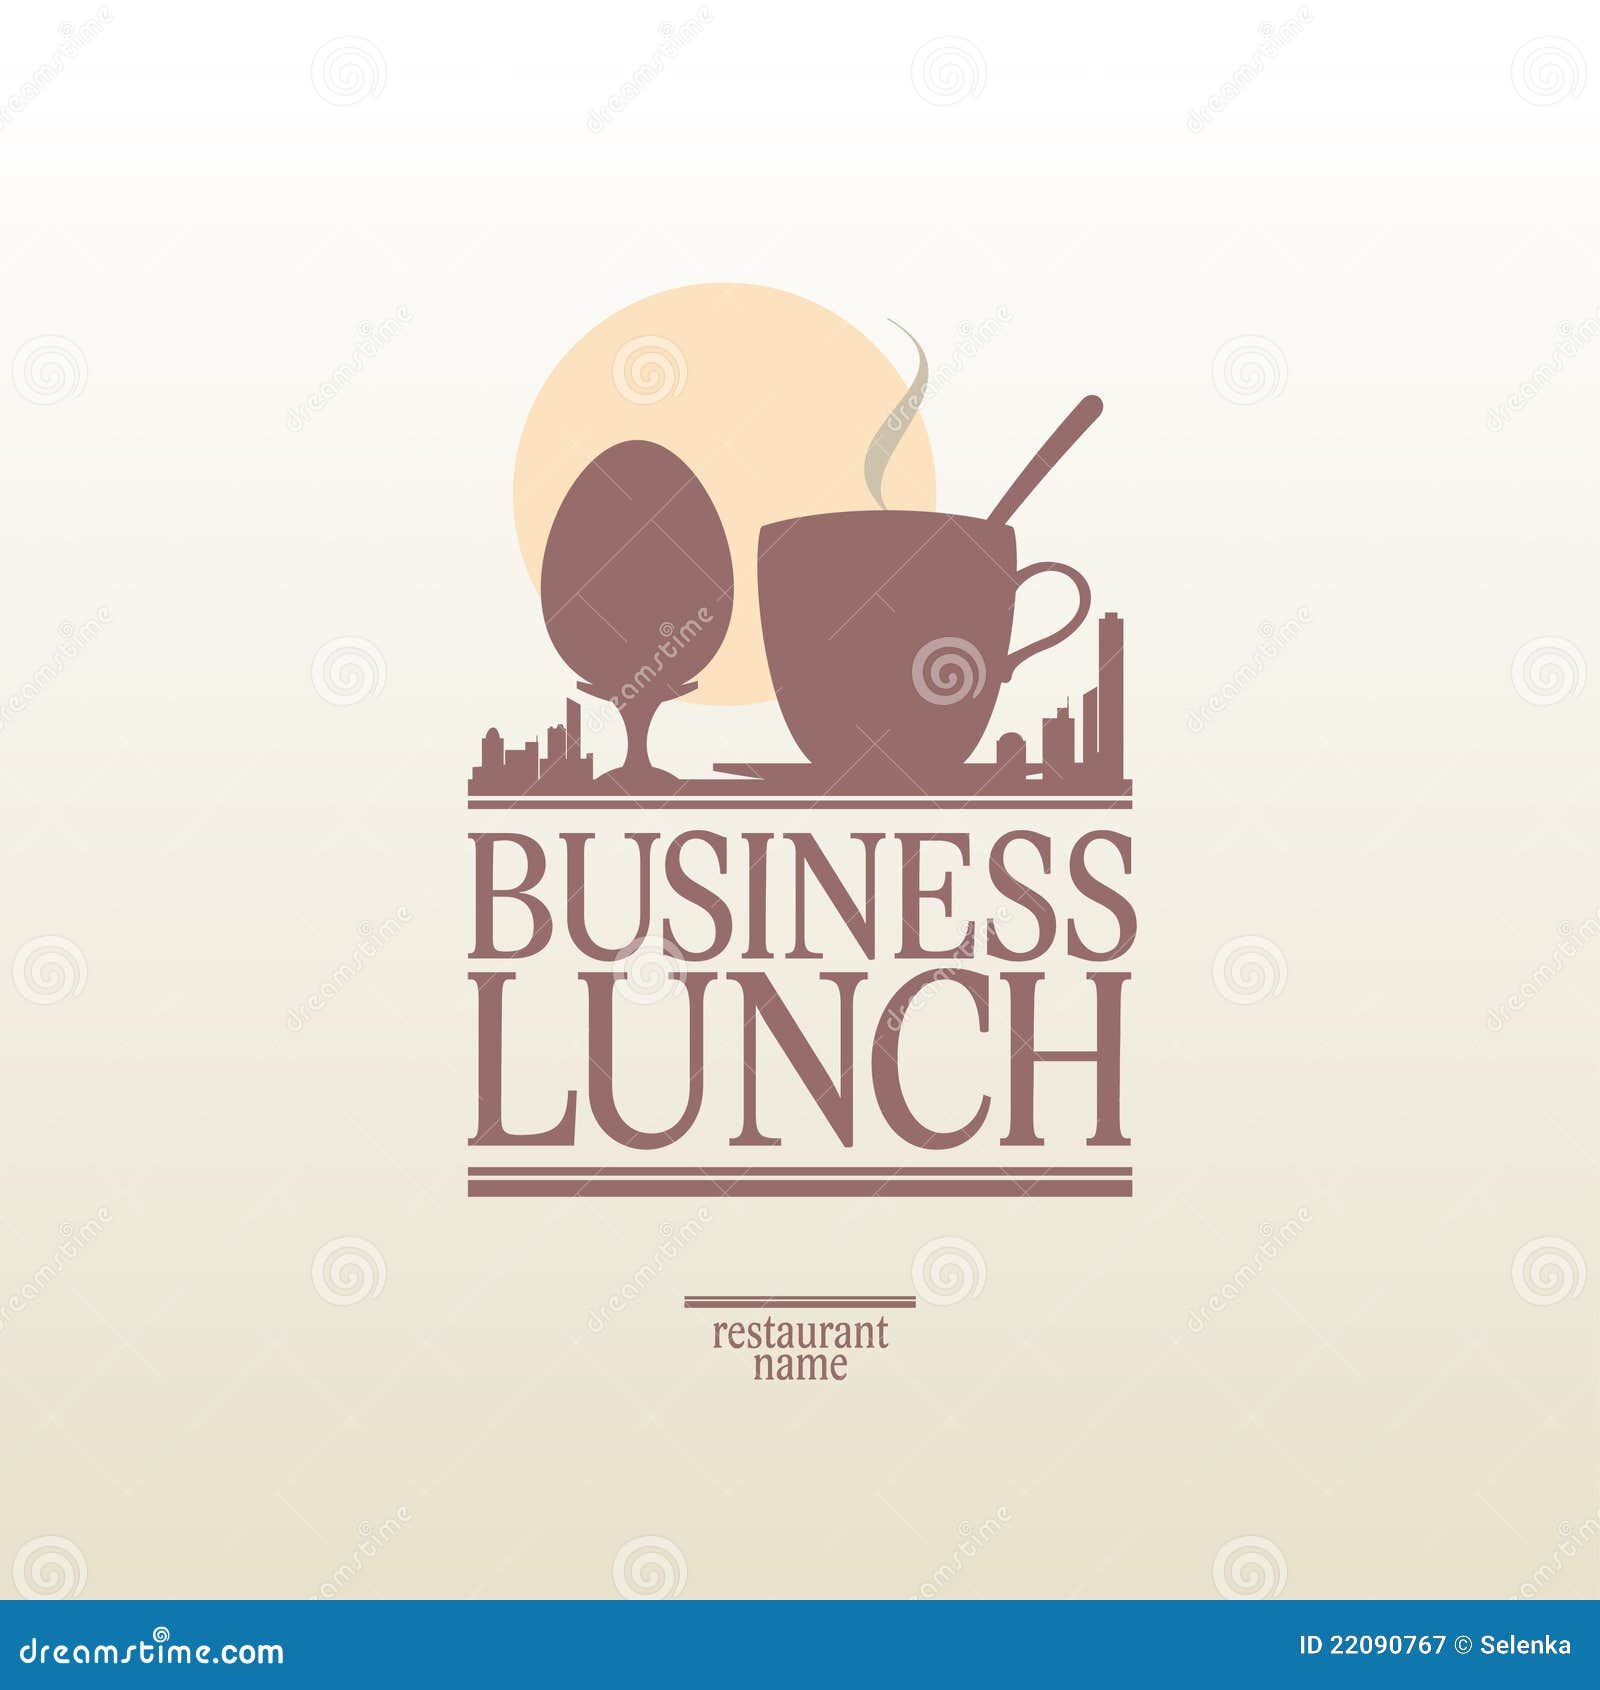 business lunch clipart - photo #14